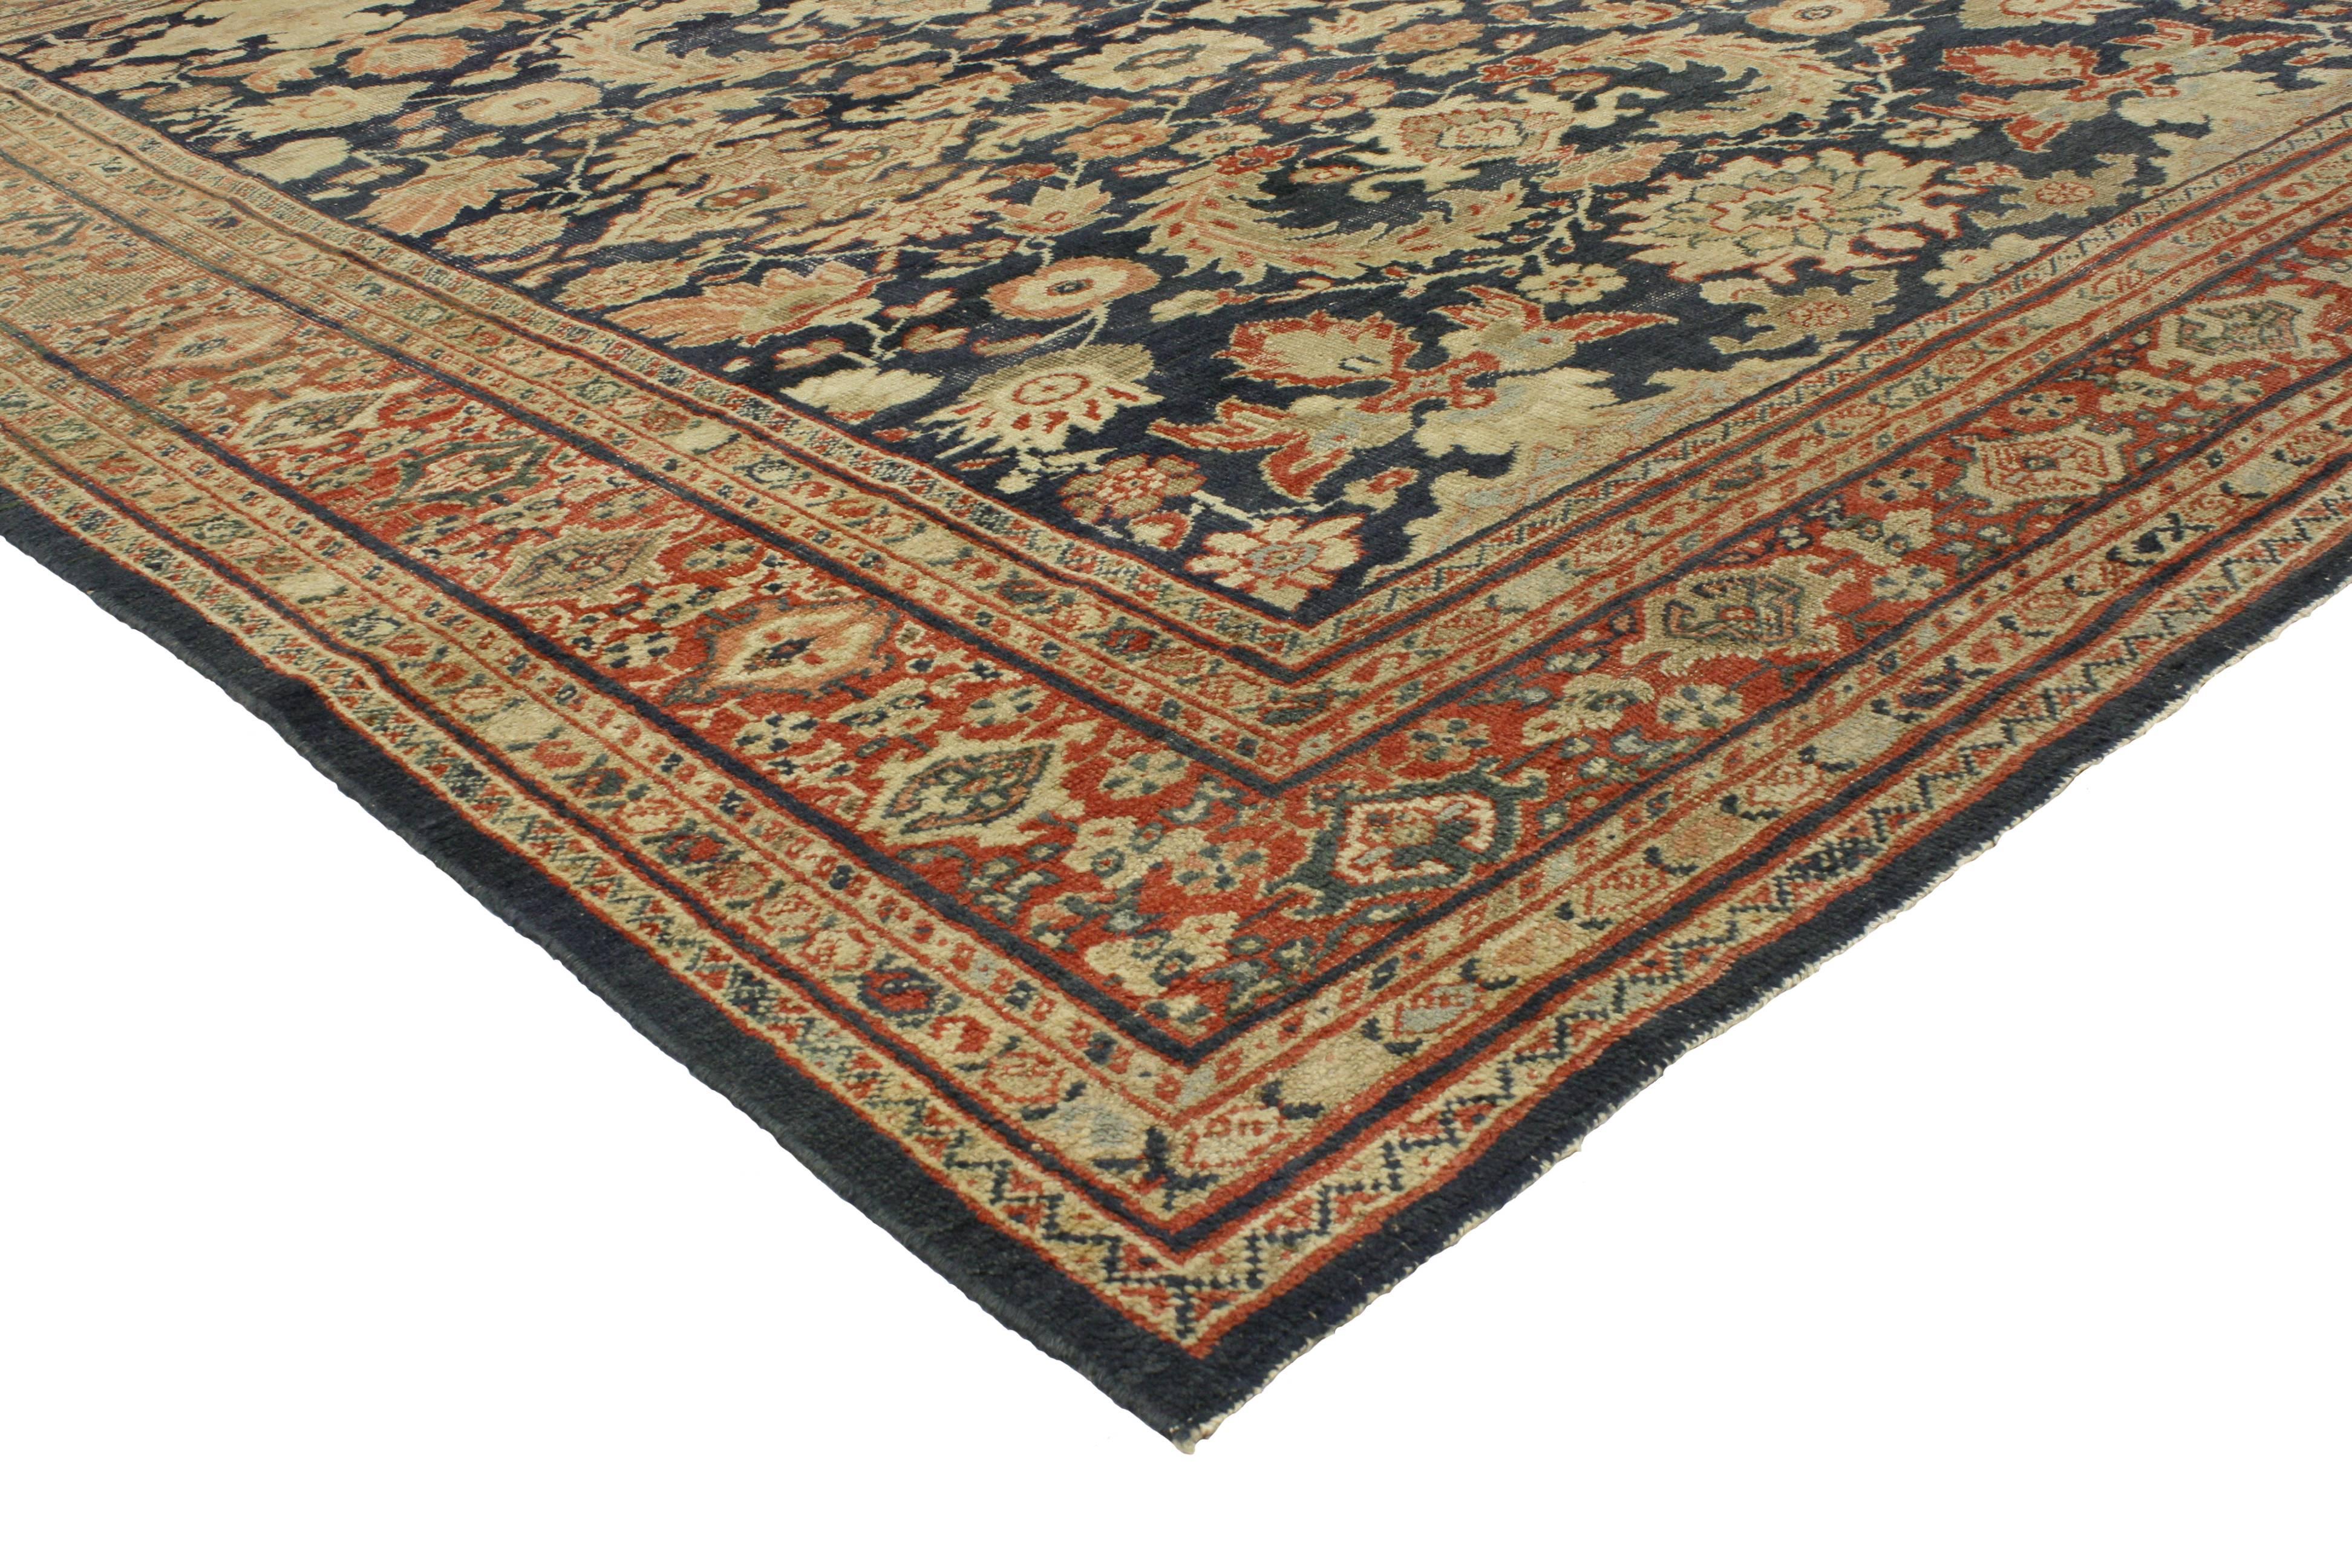 ​76791 Distressed Antique Persian Sultanabad Rug with Modern Traditional Artisan Style 08'02 x 09'11. This hand-knotted wool antique Persian Sultanabad rug features a Curled Sickle Leaf design. The lively all-over pattern is composed of blooming